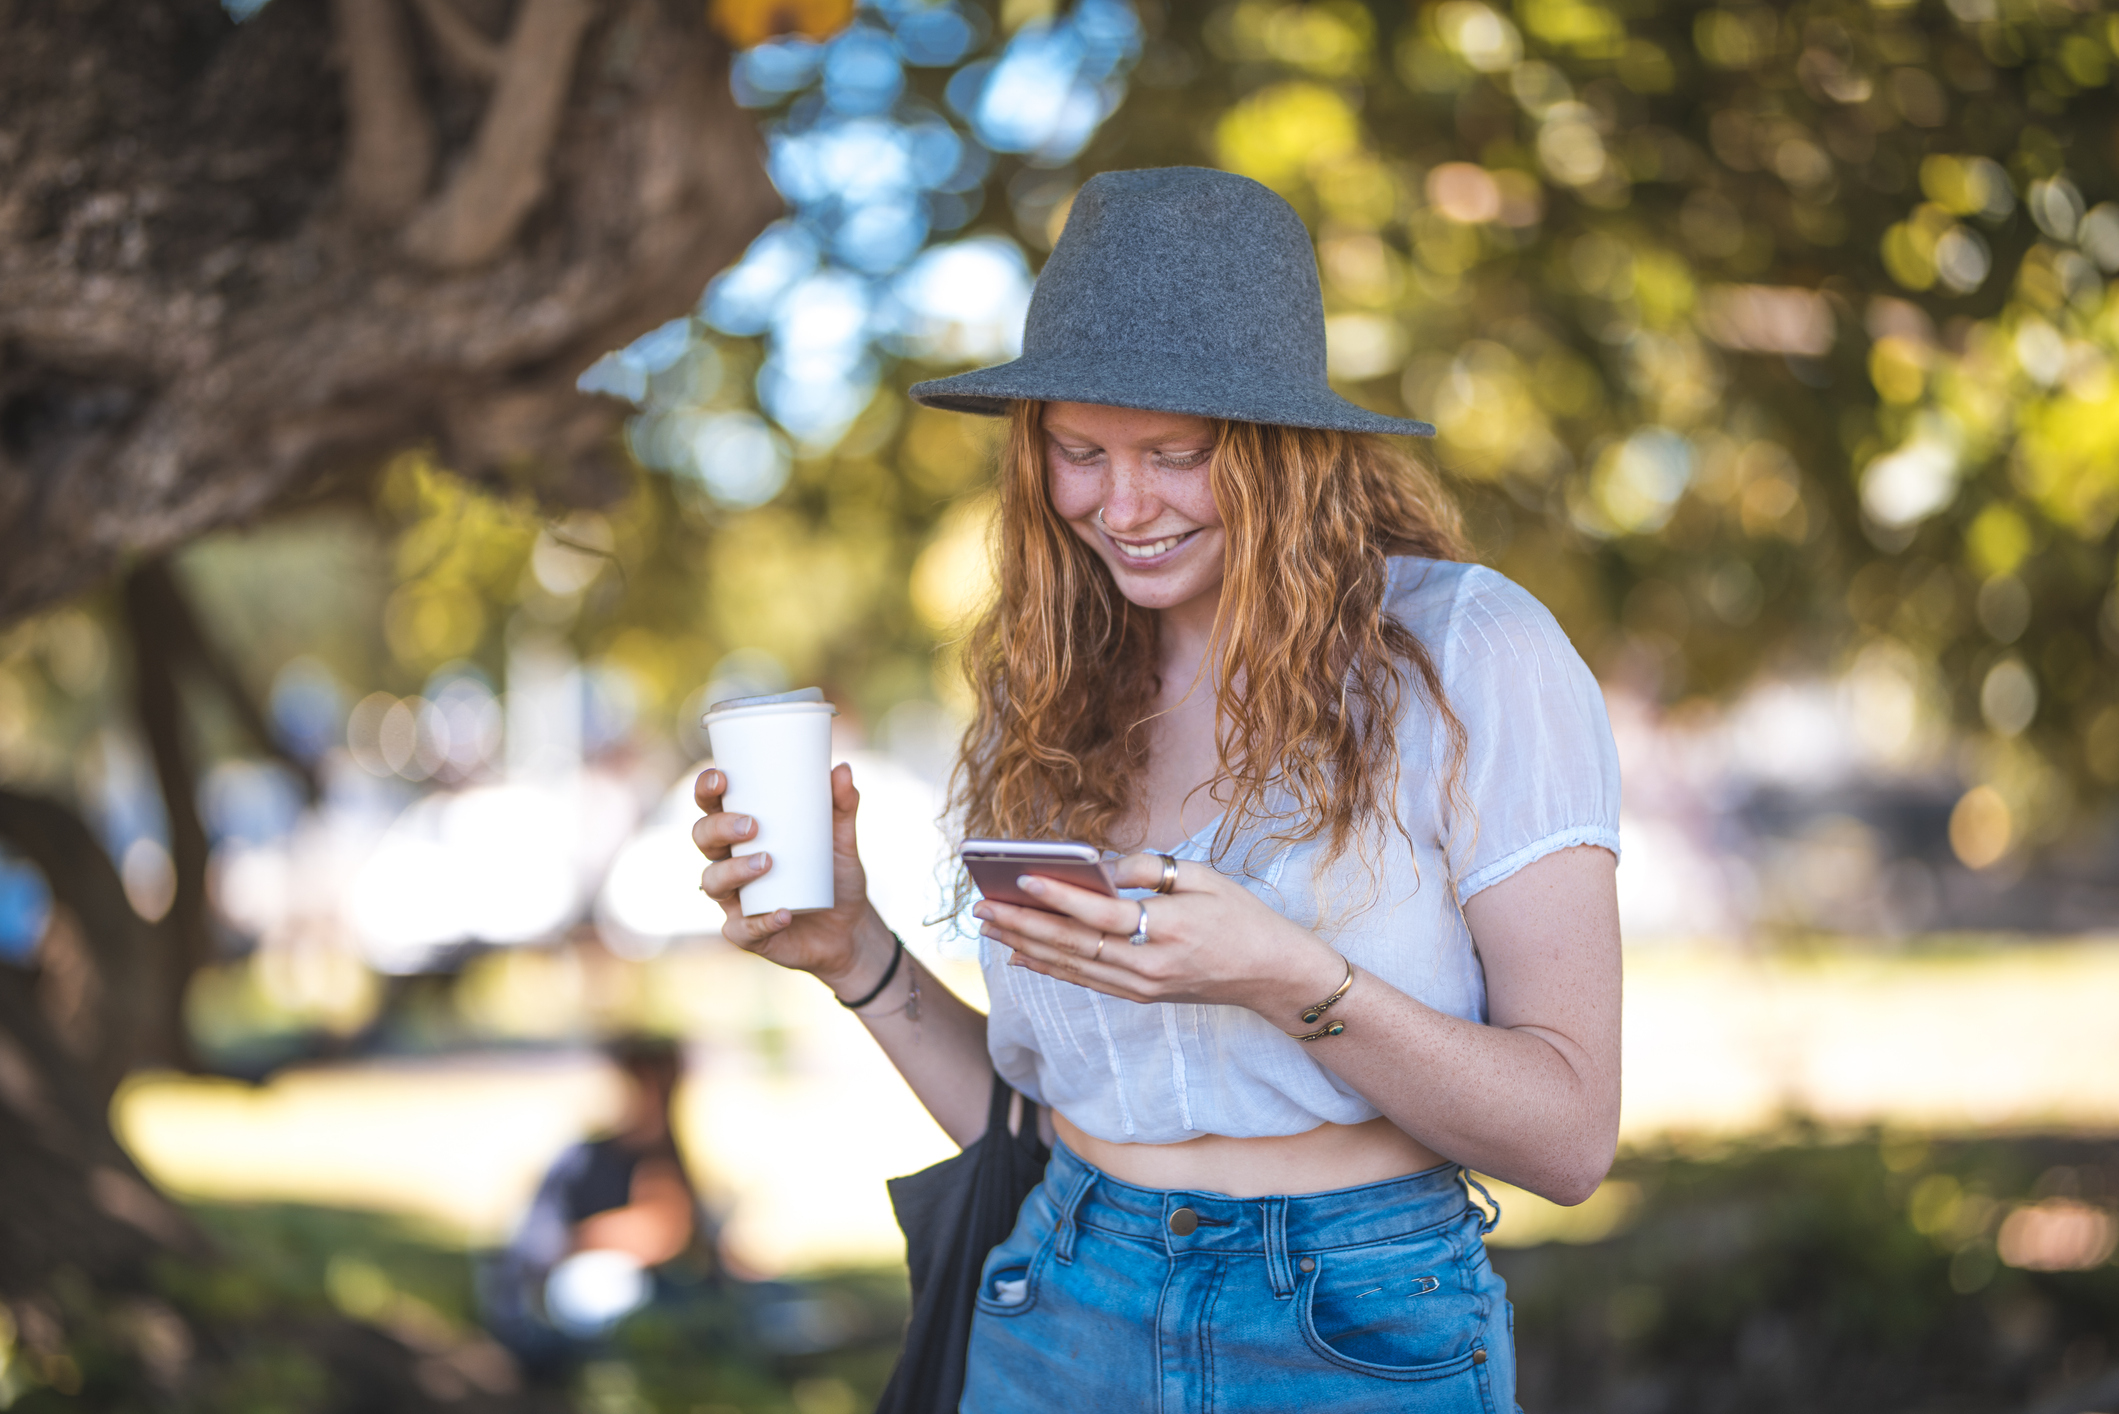 Women looking at phone while holding coffee